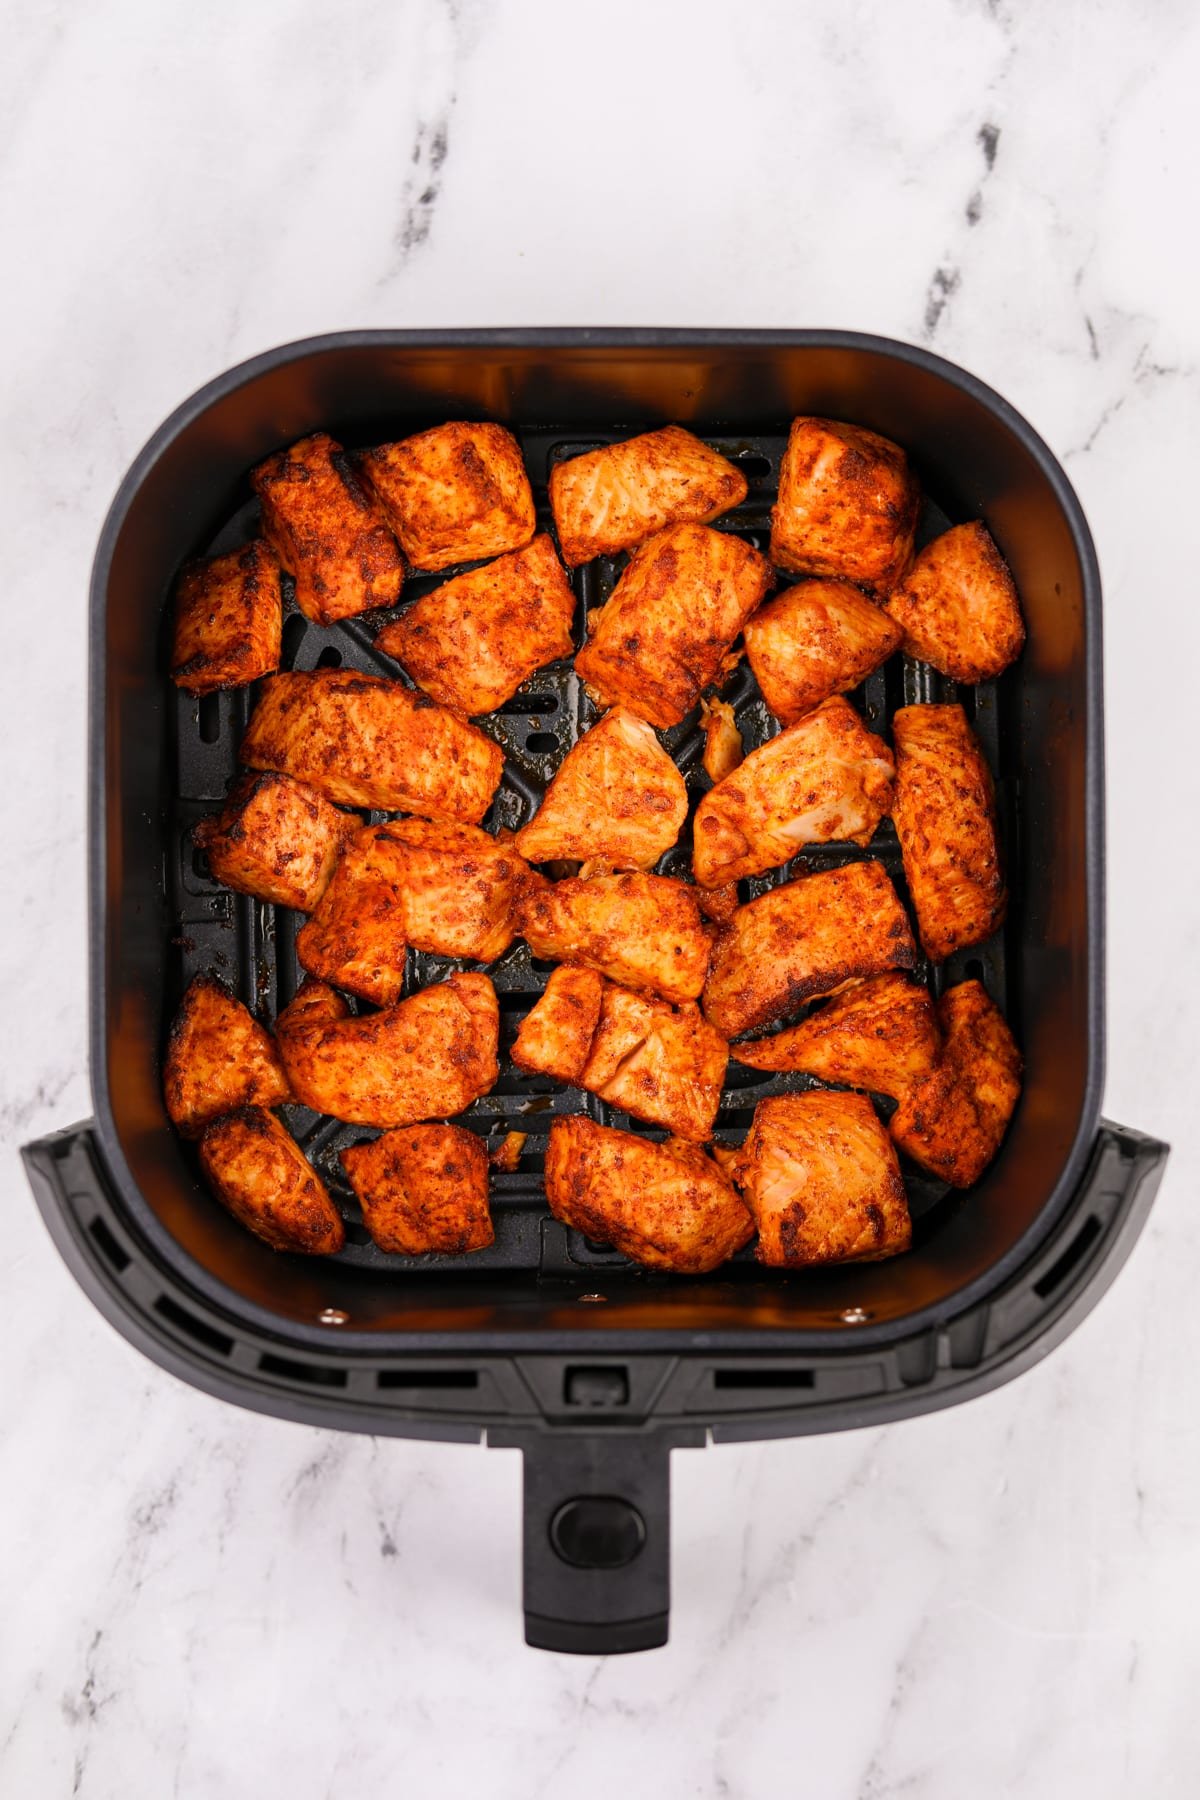 An air fryer basket filled with cooked salmon pieces.